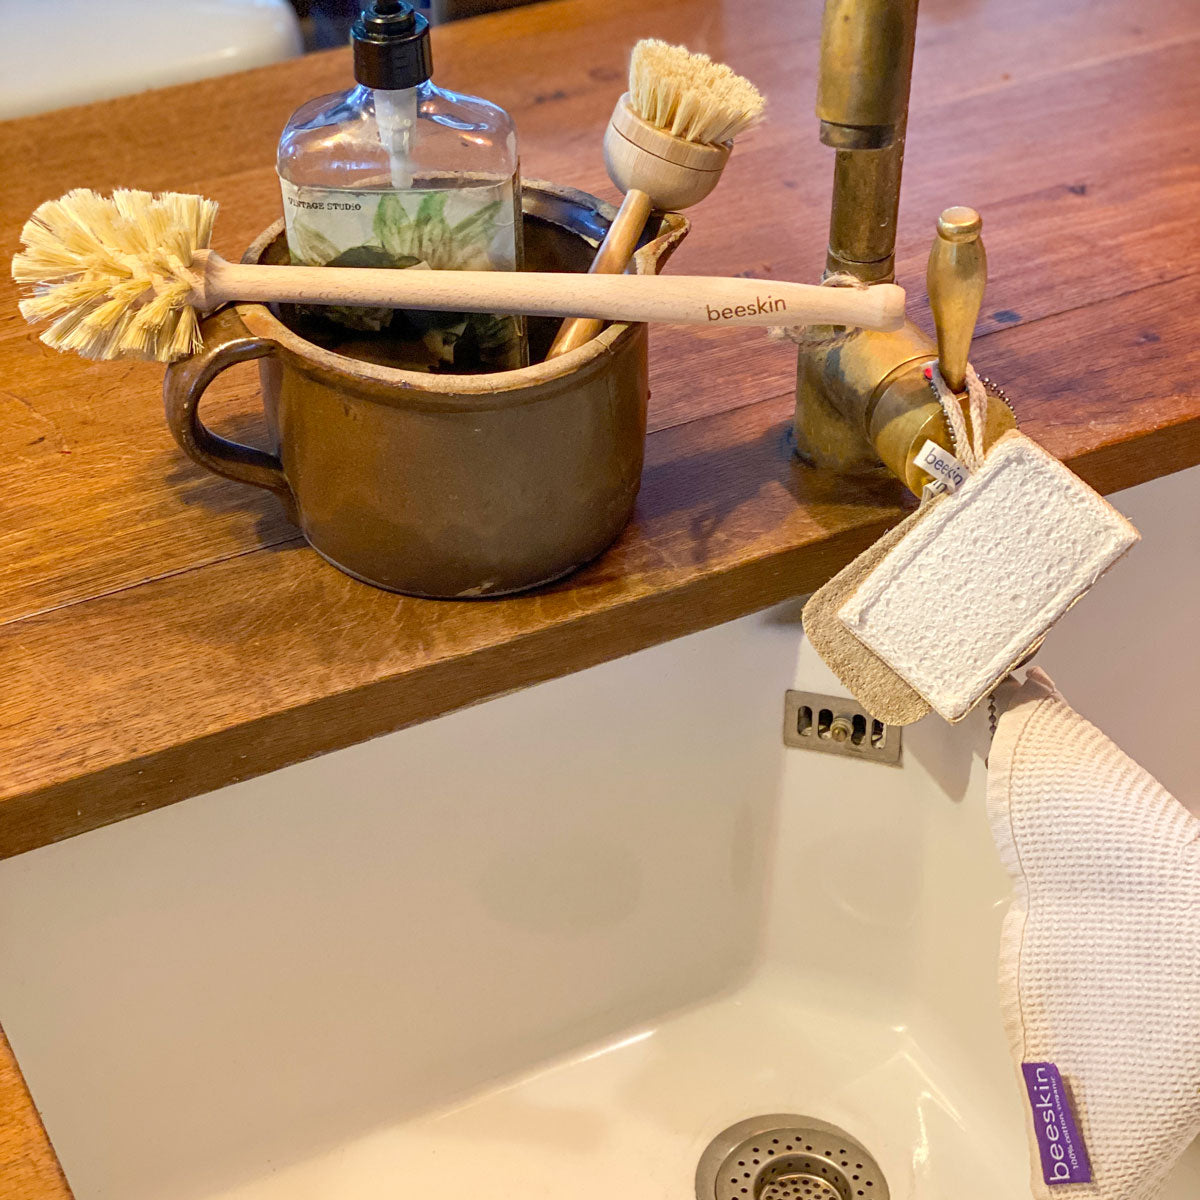 beeskin brushes and loofah placed near a white sink